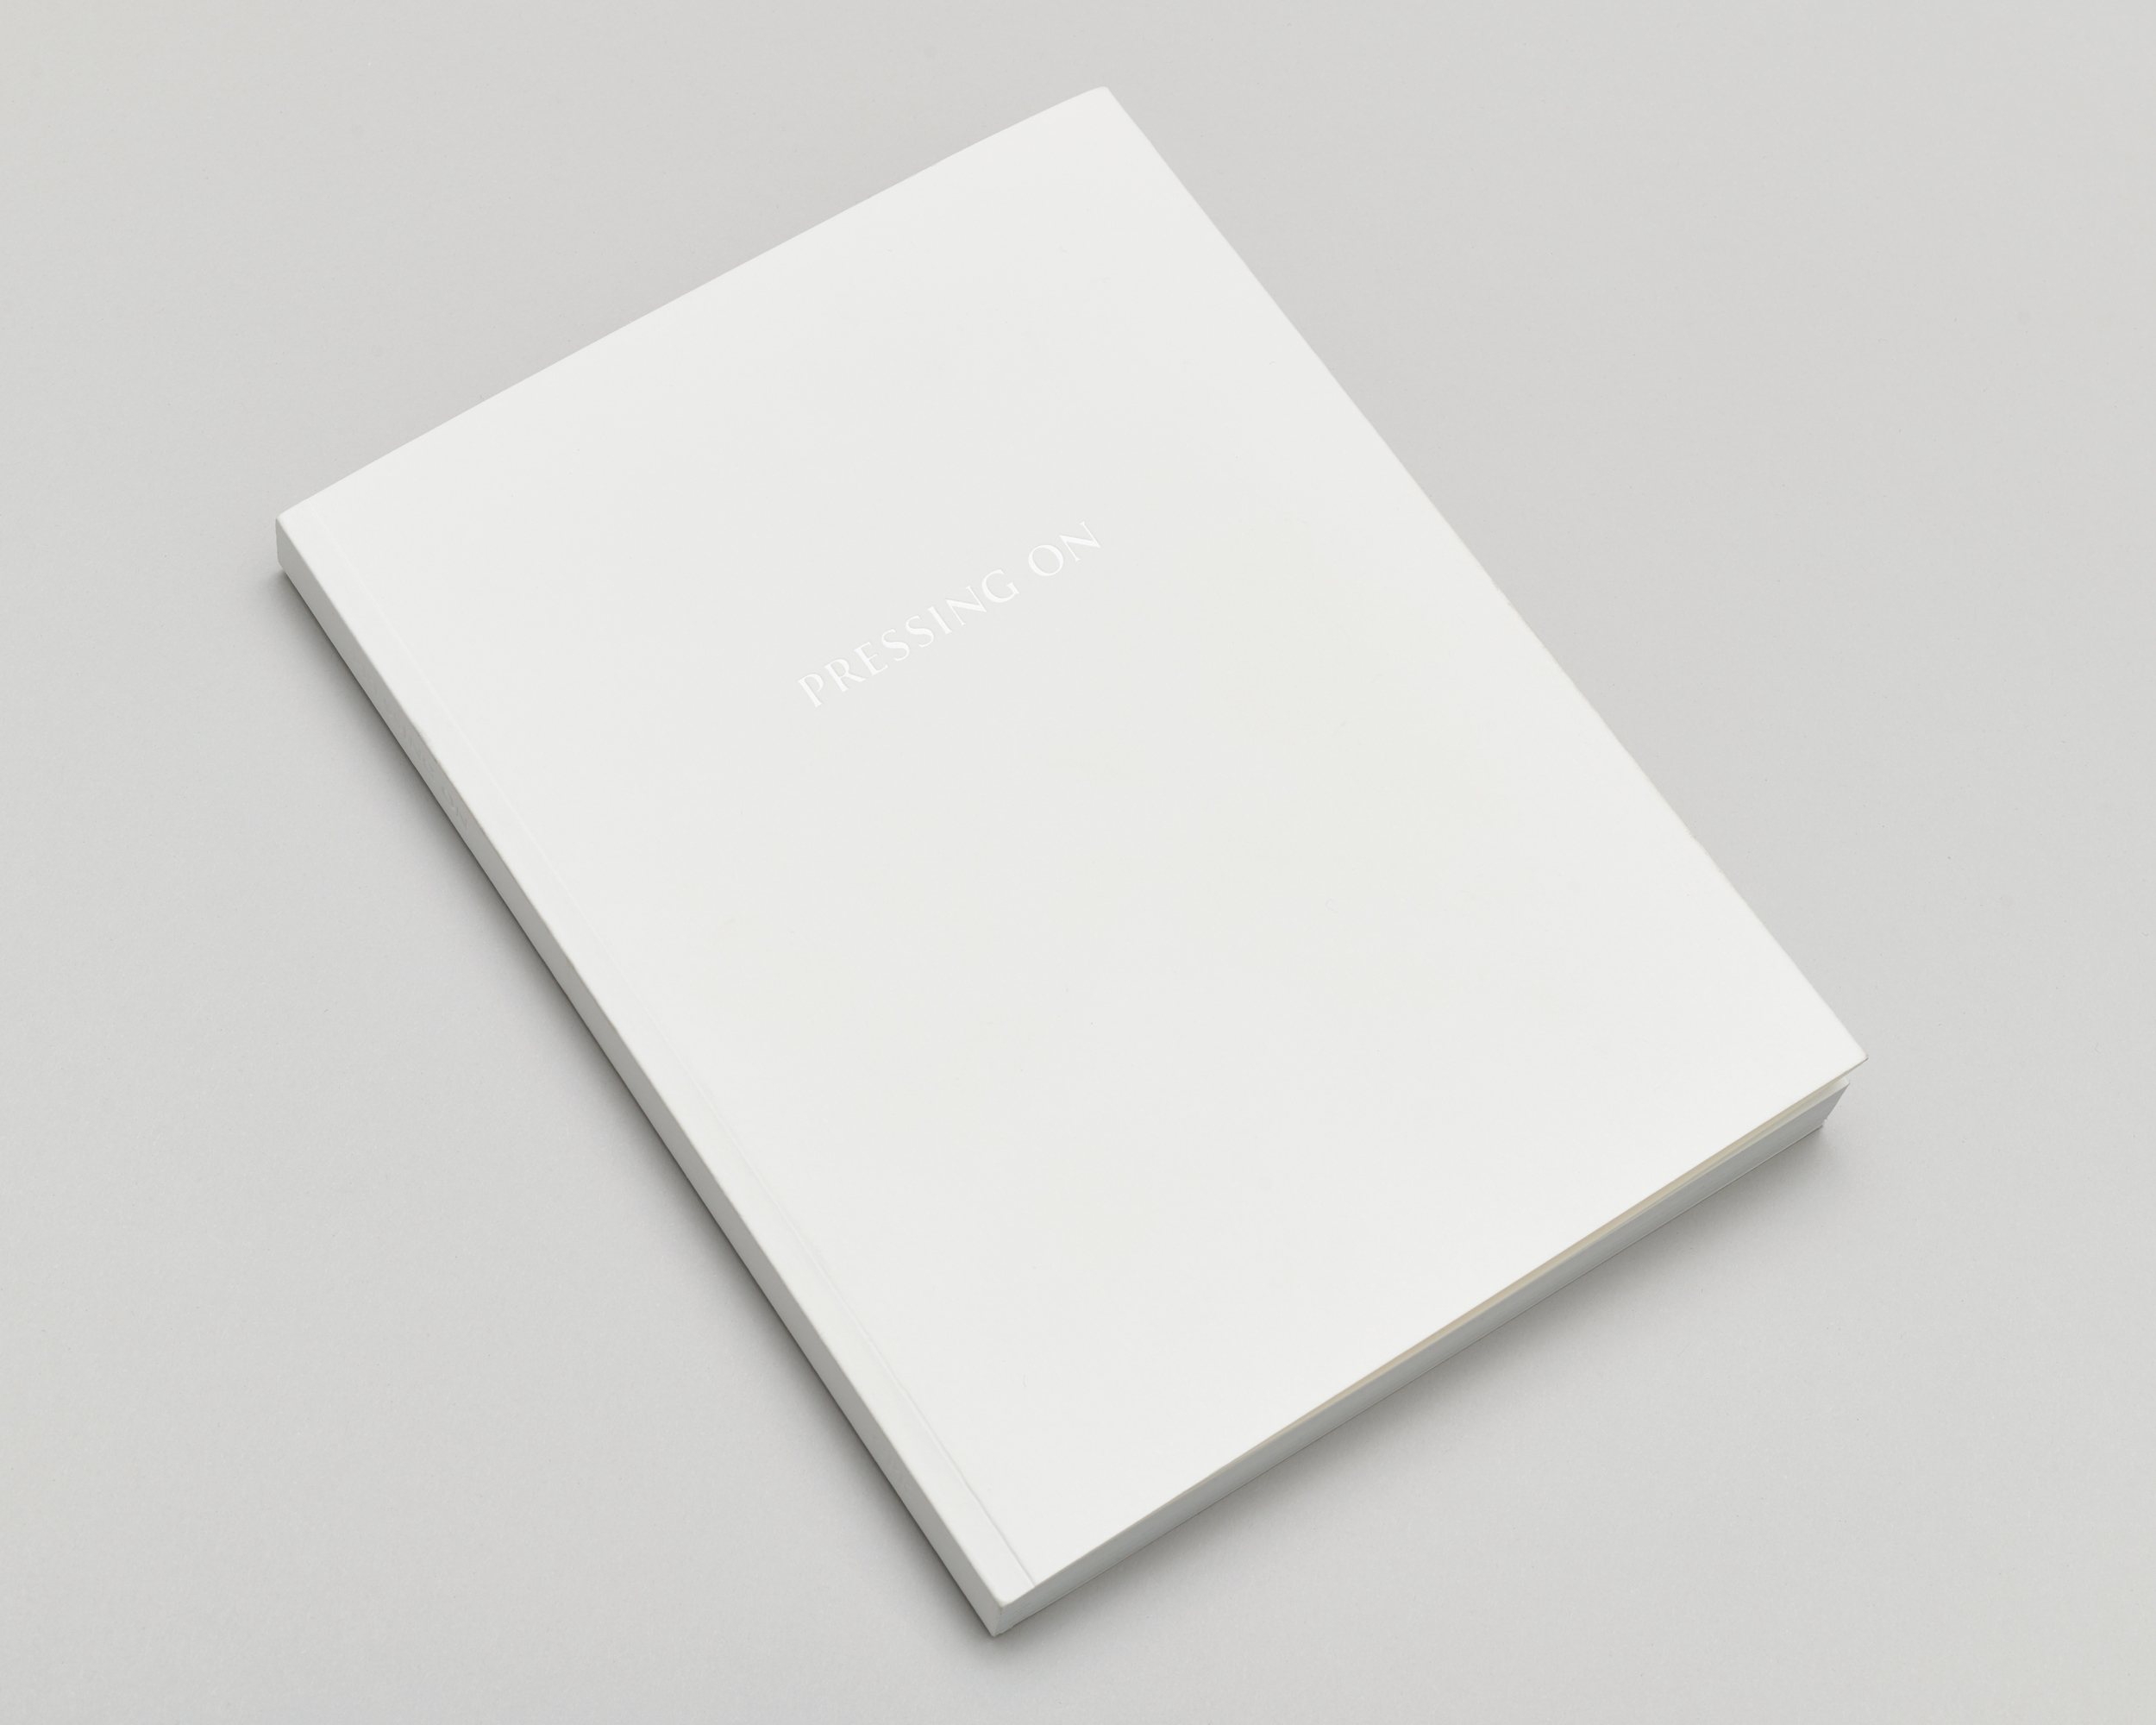 Closed white book on a light grey surface